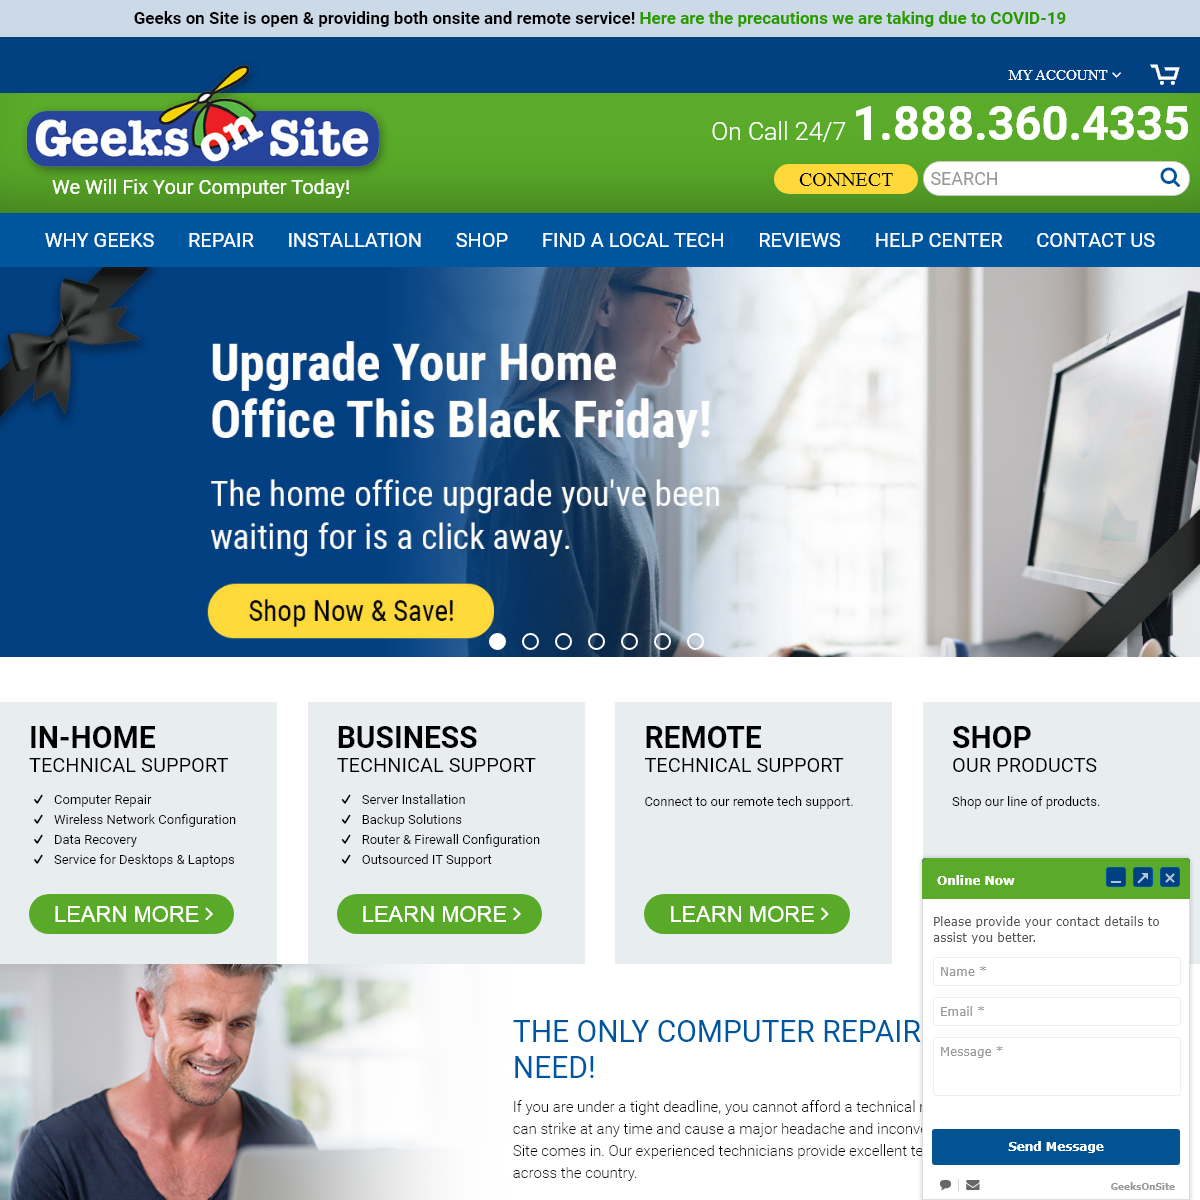 A complete backup of geeksonsite.com